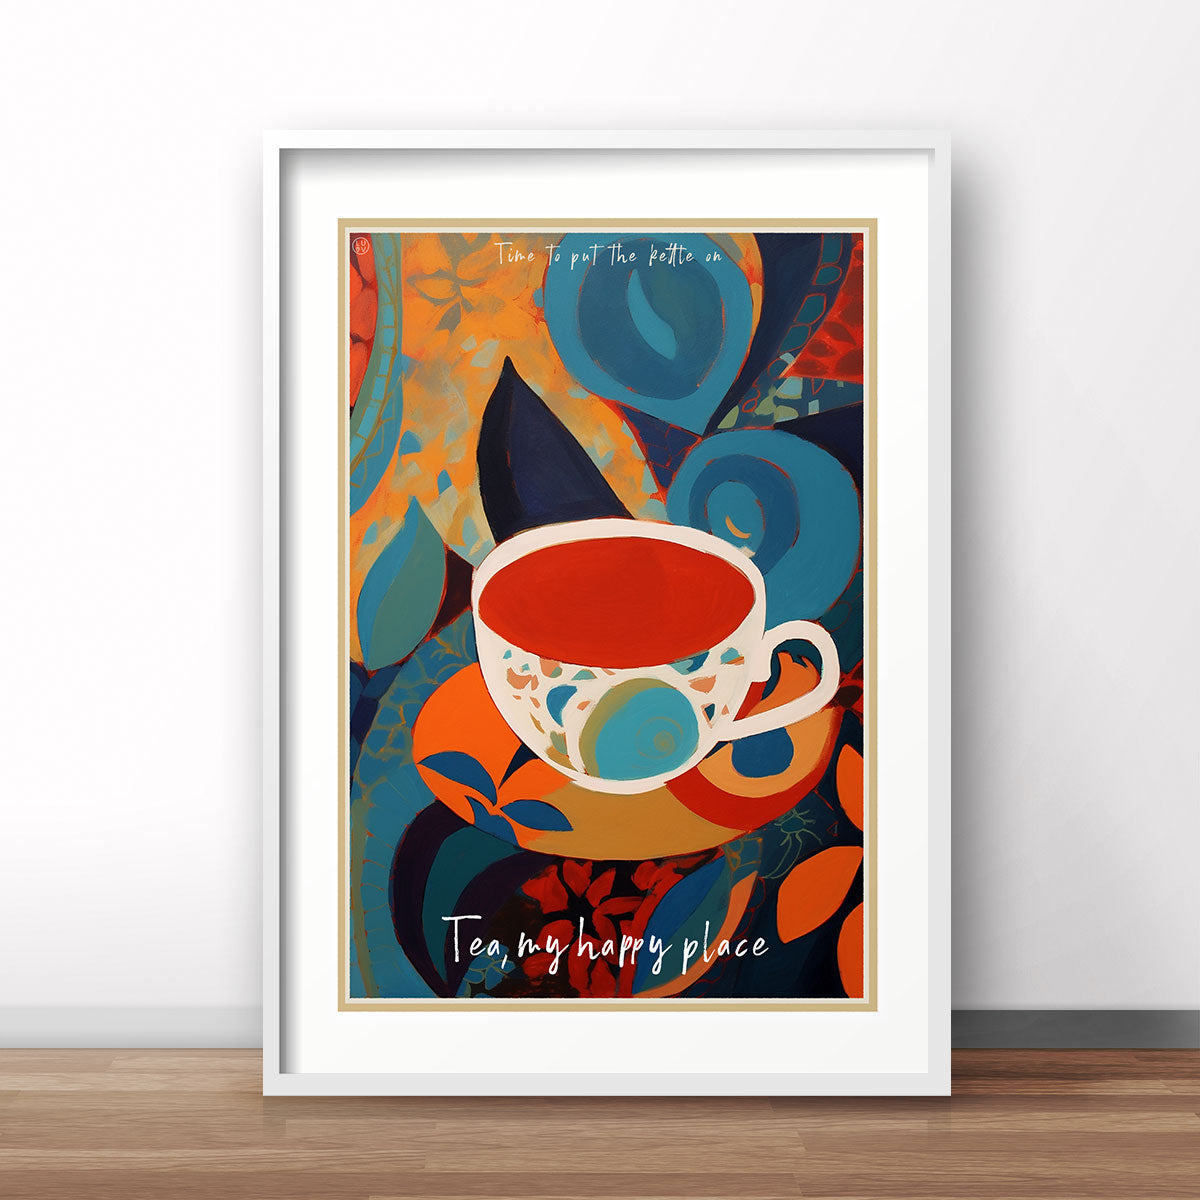 English Tea retro vintage poster print from Places We Luv